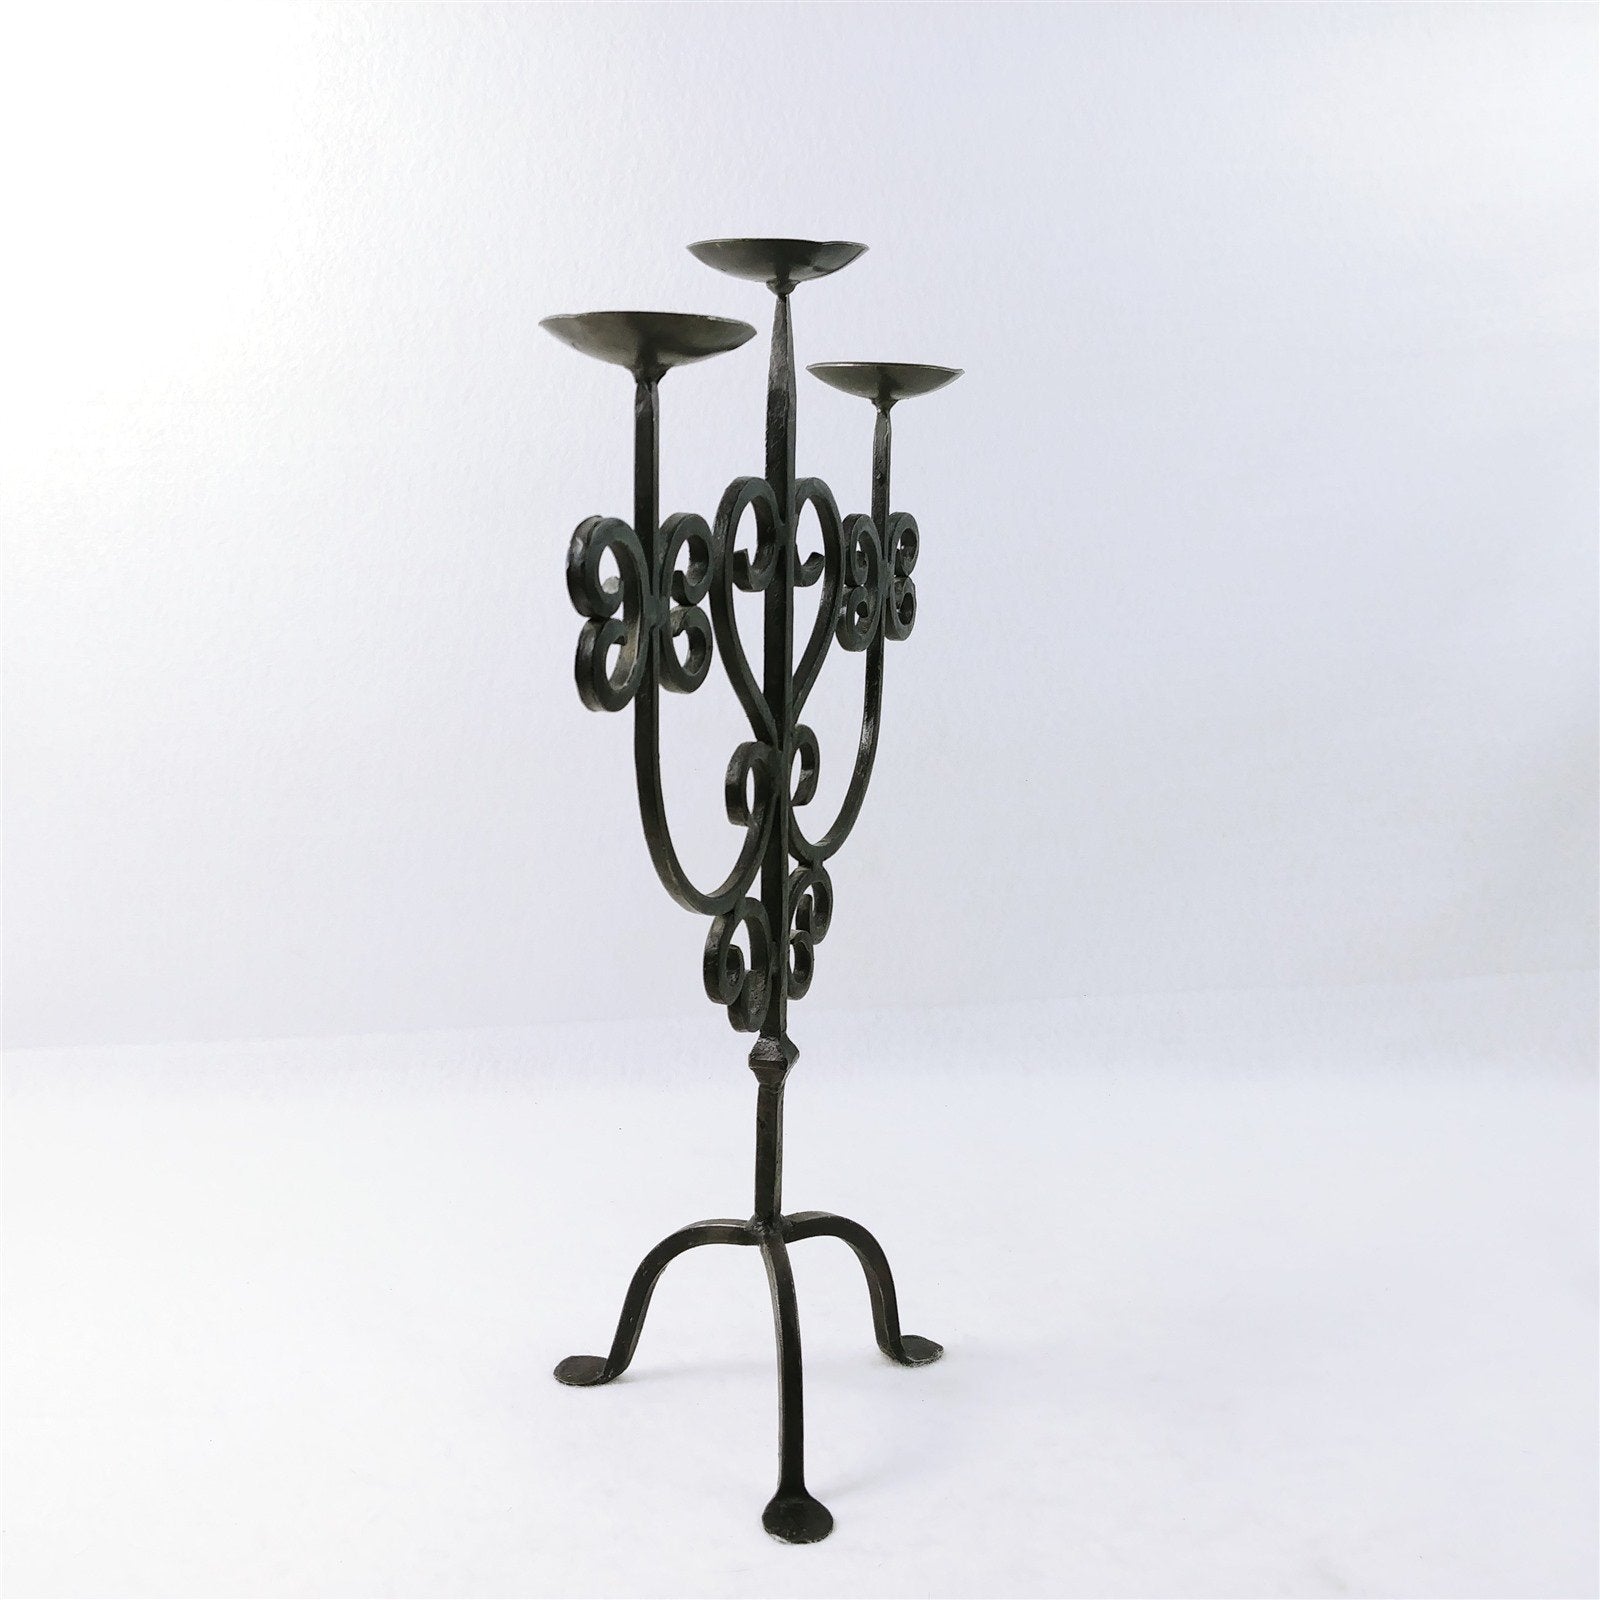 Candelabra Pillar Candle Stand Metal 3 Candle Holder plates 16"